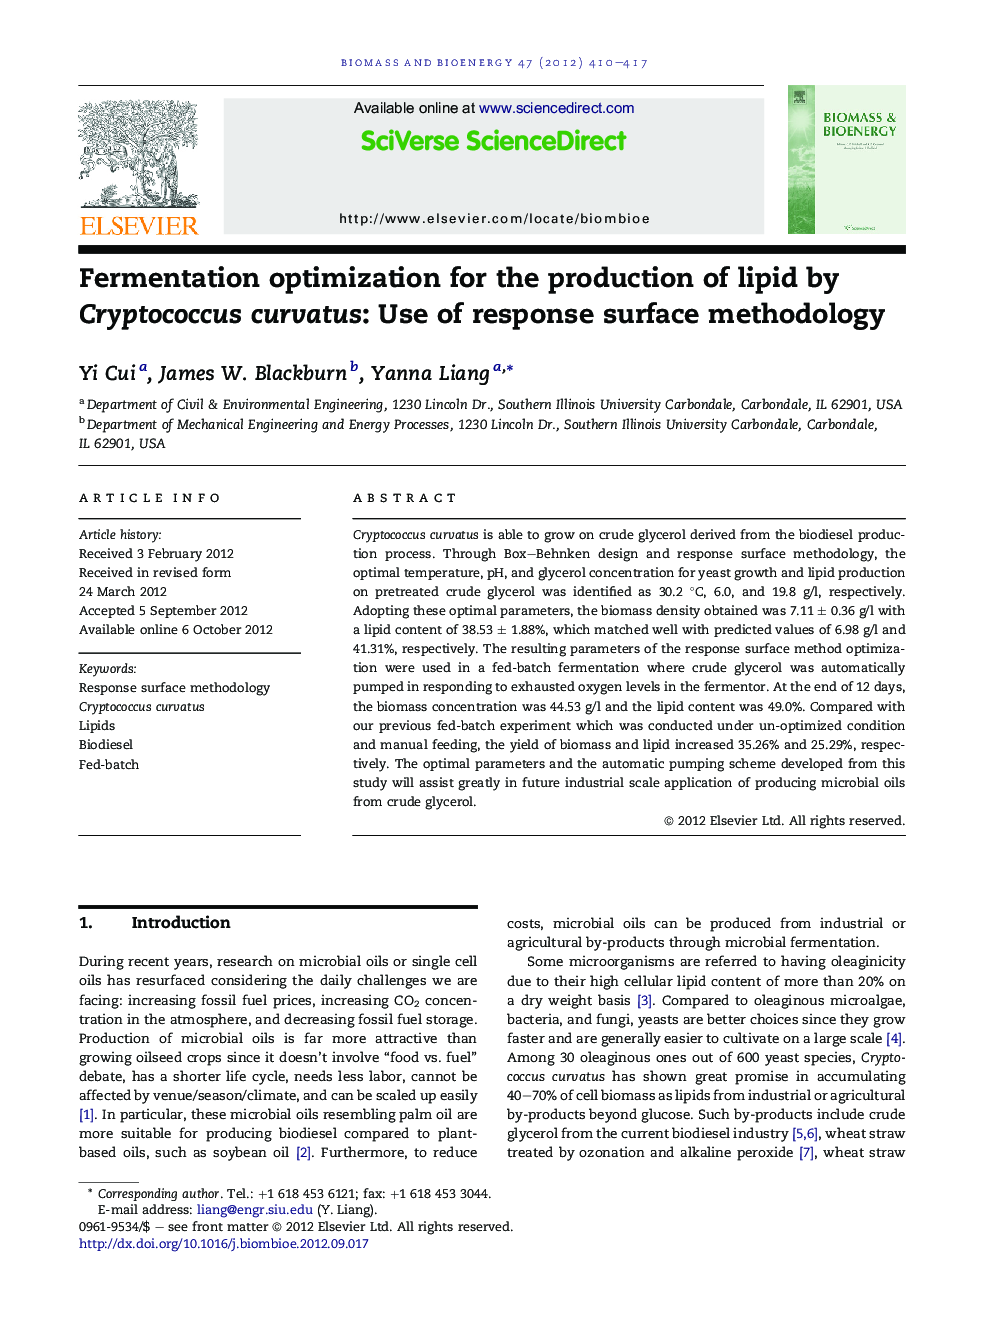 Fermentation optimization for the production of lipid by Cryptococcus curvatus: Use of response surface methodology